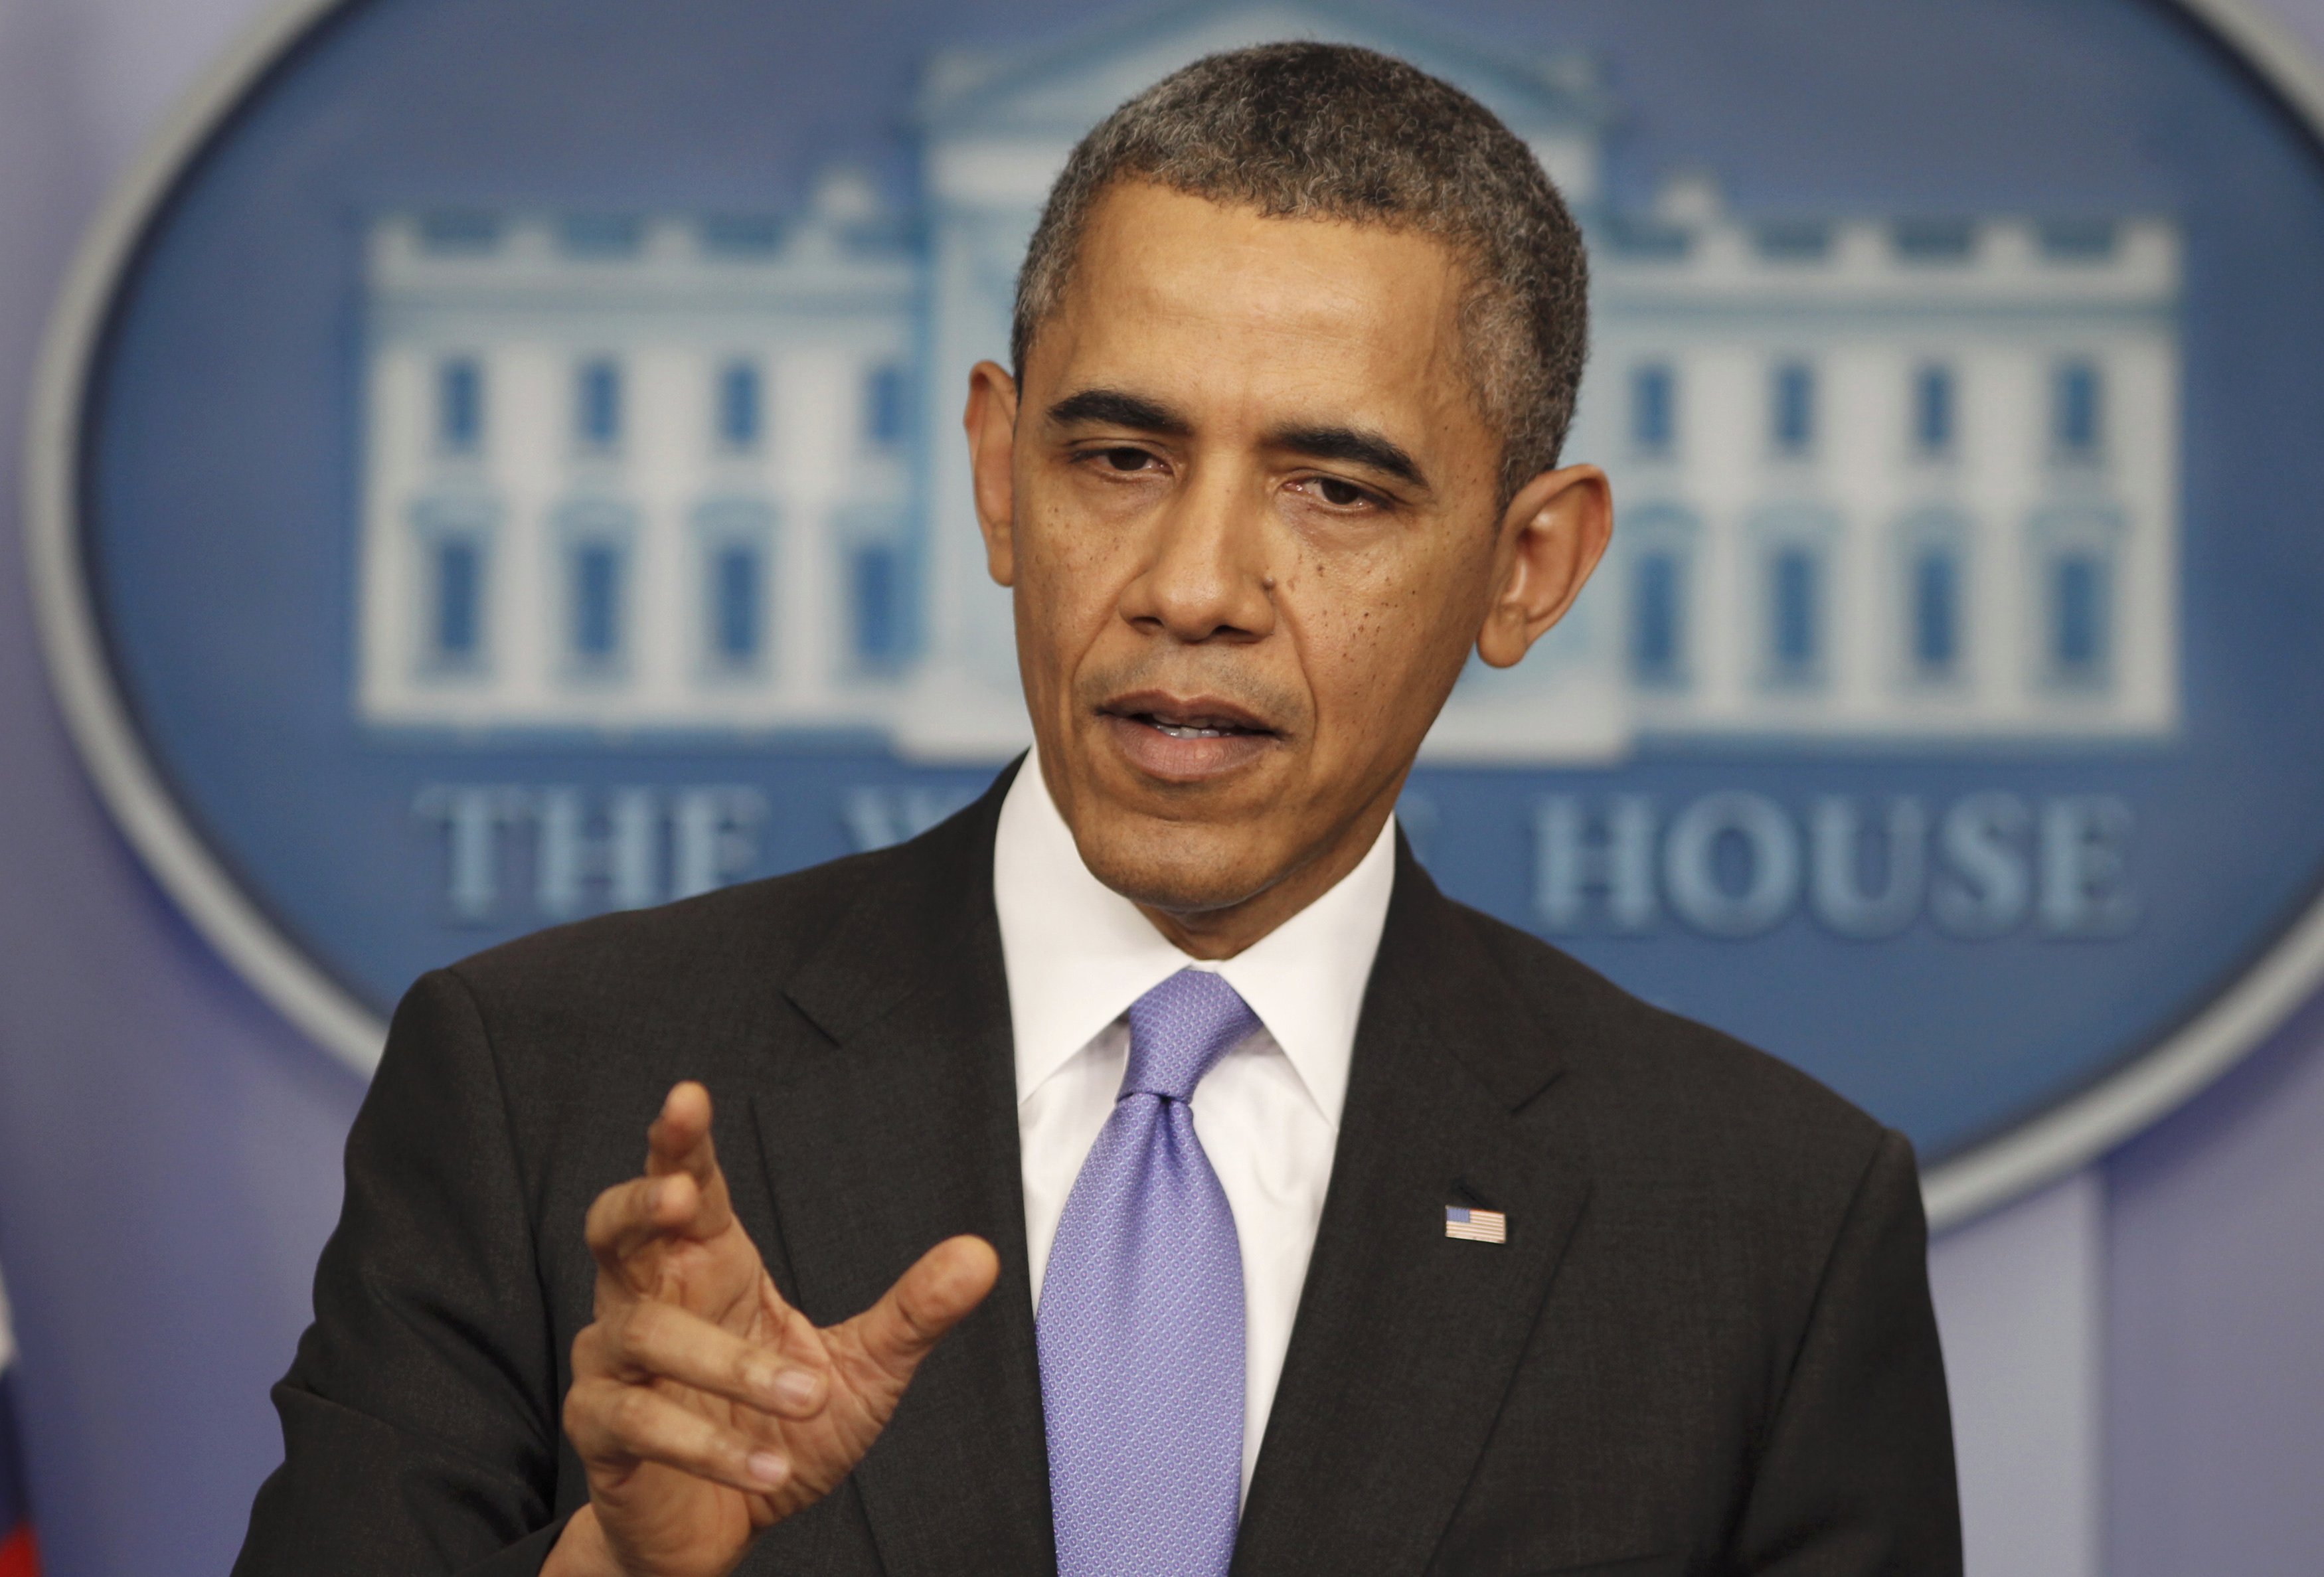 President Barack Obama on Friday defended his administration’s decisions